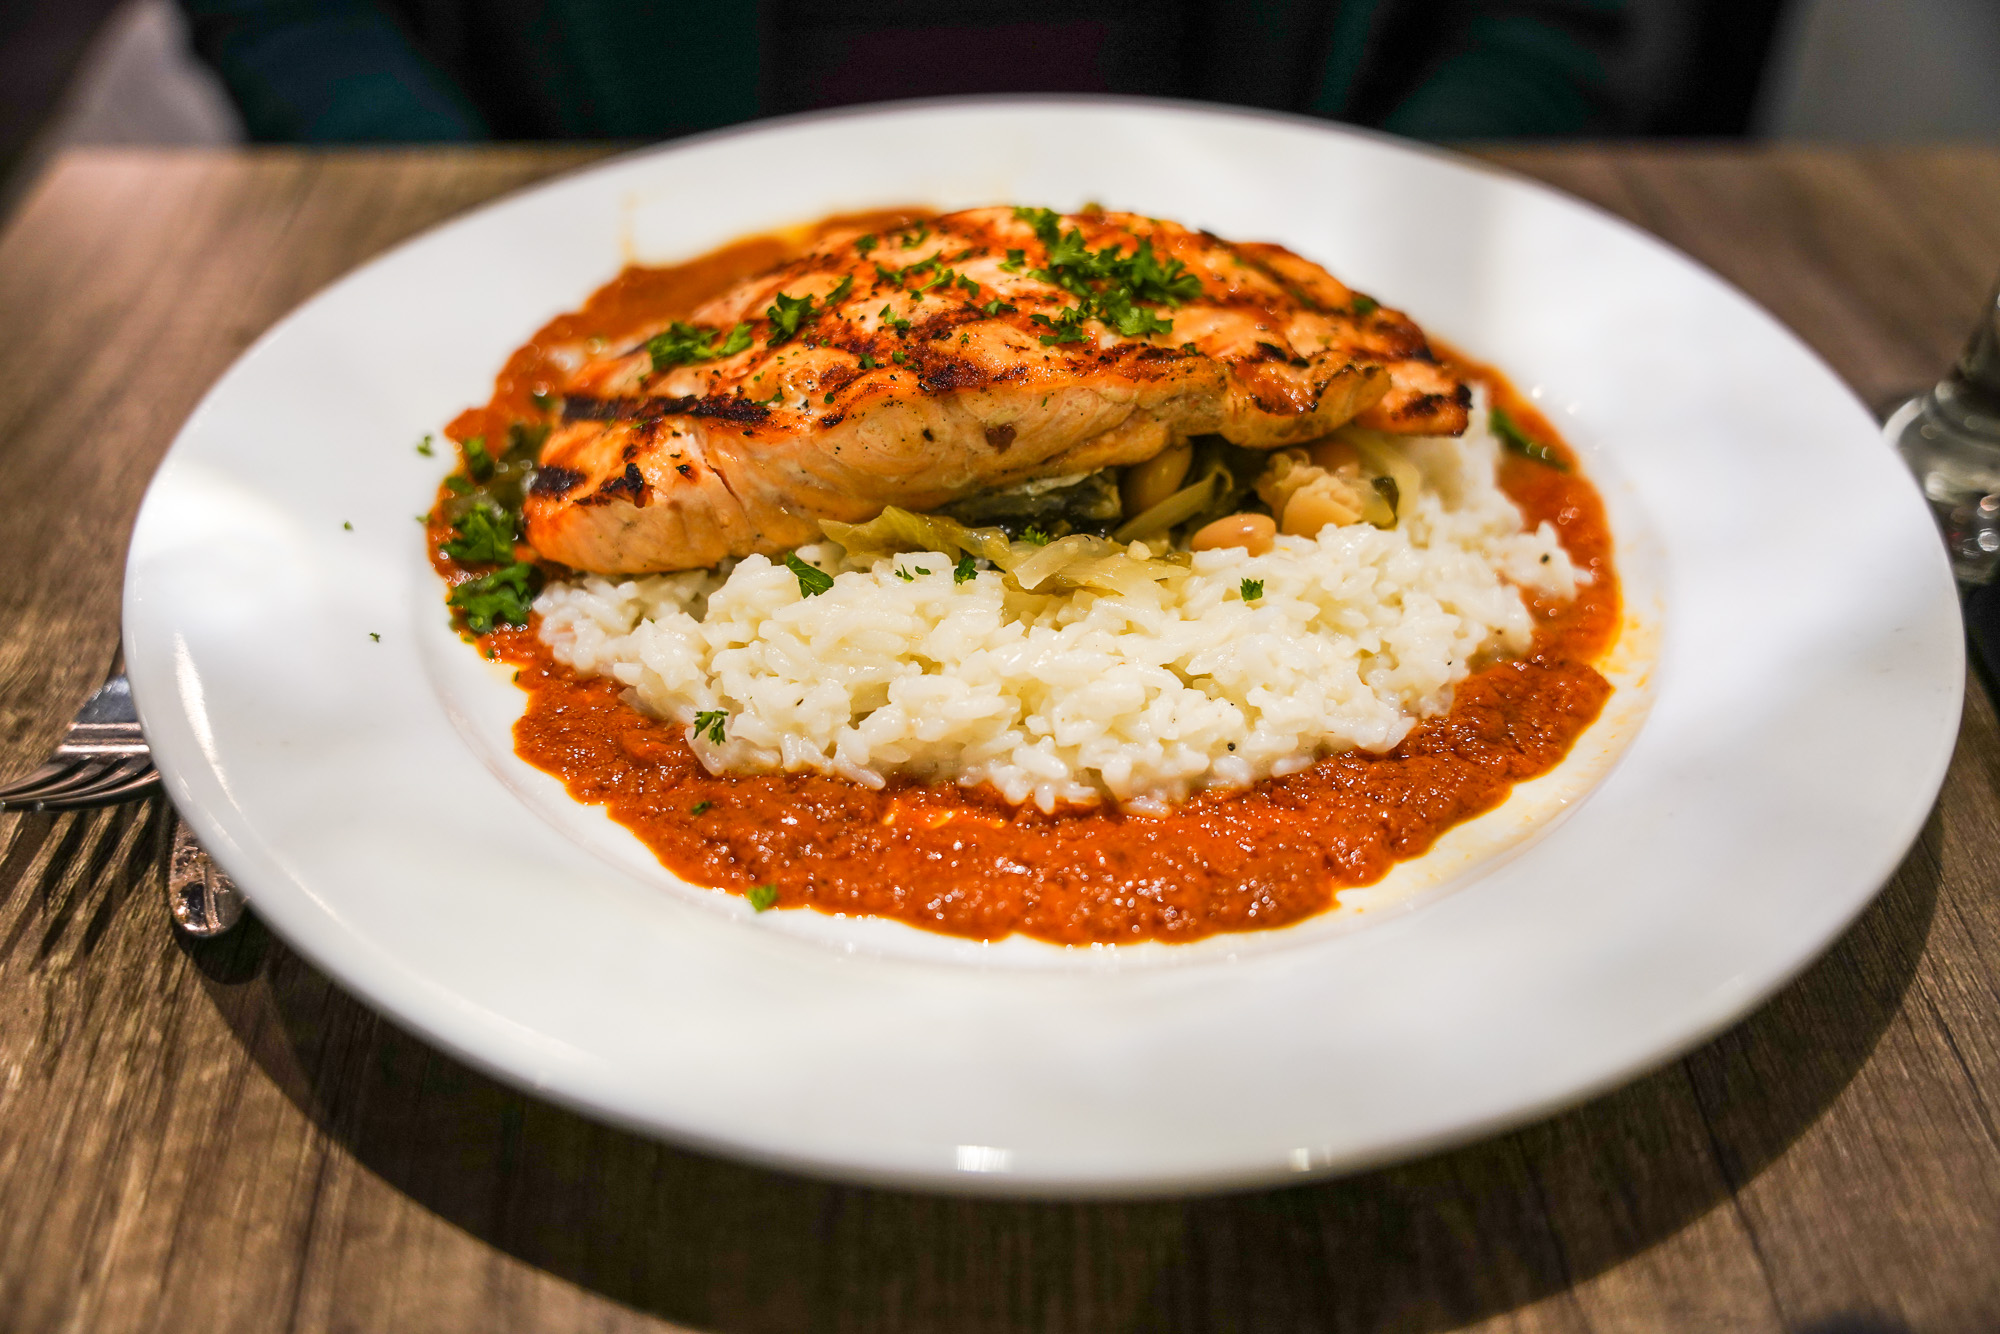 Salmon with rice